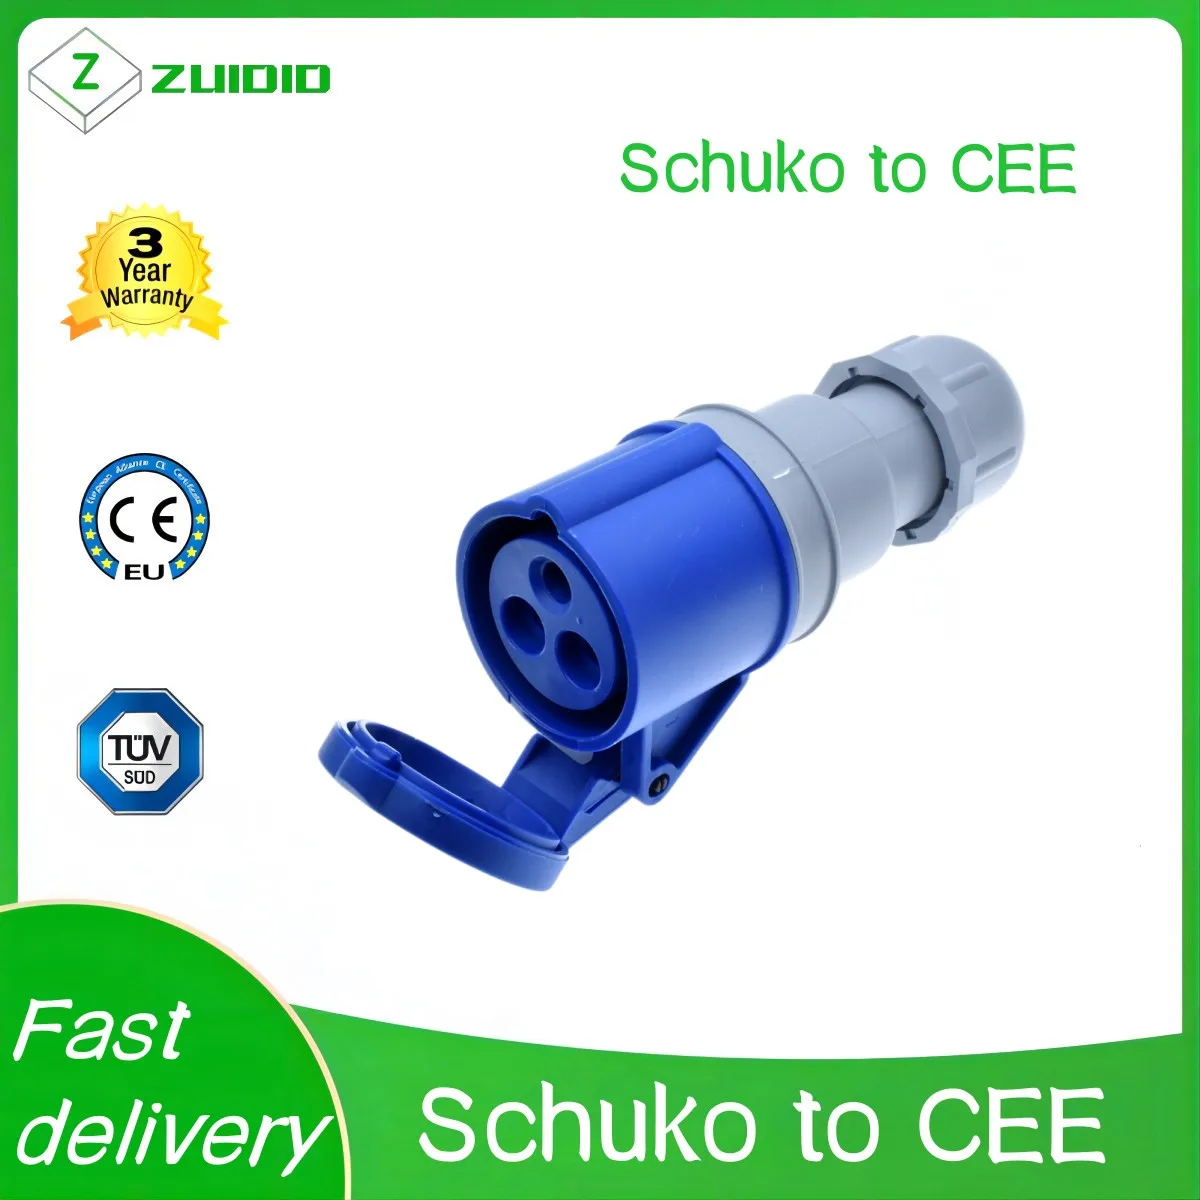 

H05VV-F 1.5mm Cord 316P6 plug into Euro CEE7/3 Outlet Socket EU Schuko 2 prong plug to IEC309 316C6 Power Cable,16A 250V, IP44